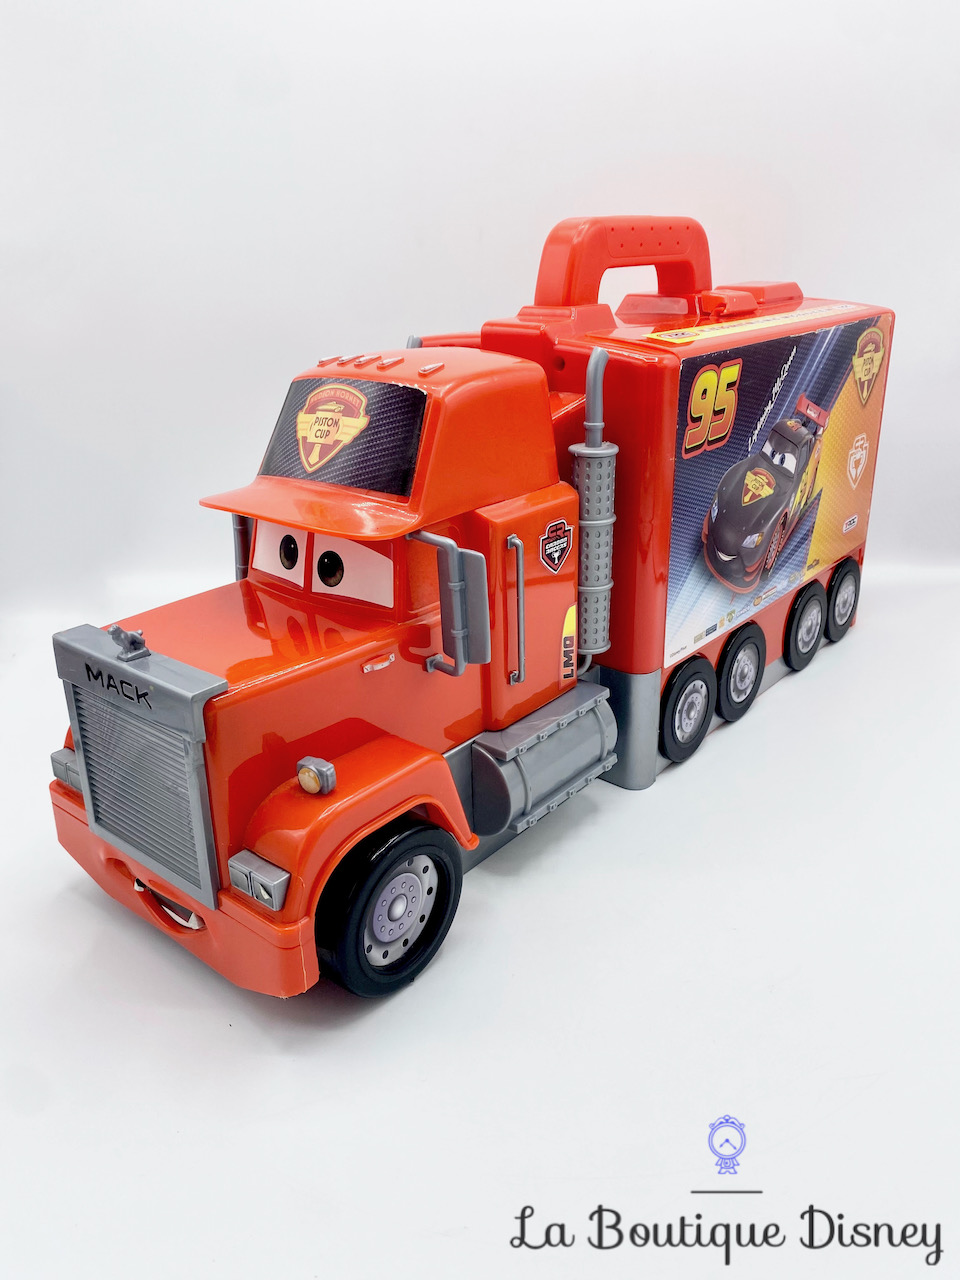 Jouet Camion Mack Truck Carbone Cars Disney Smoby Flash McQueen rouge